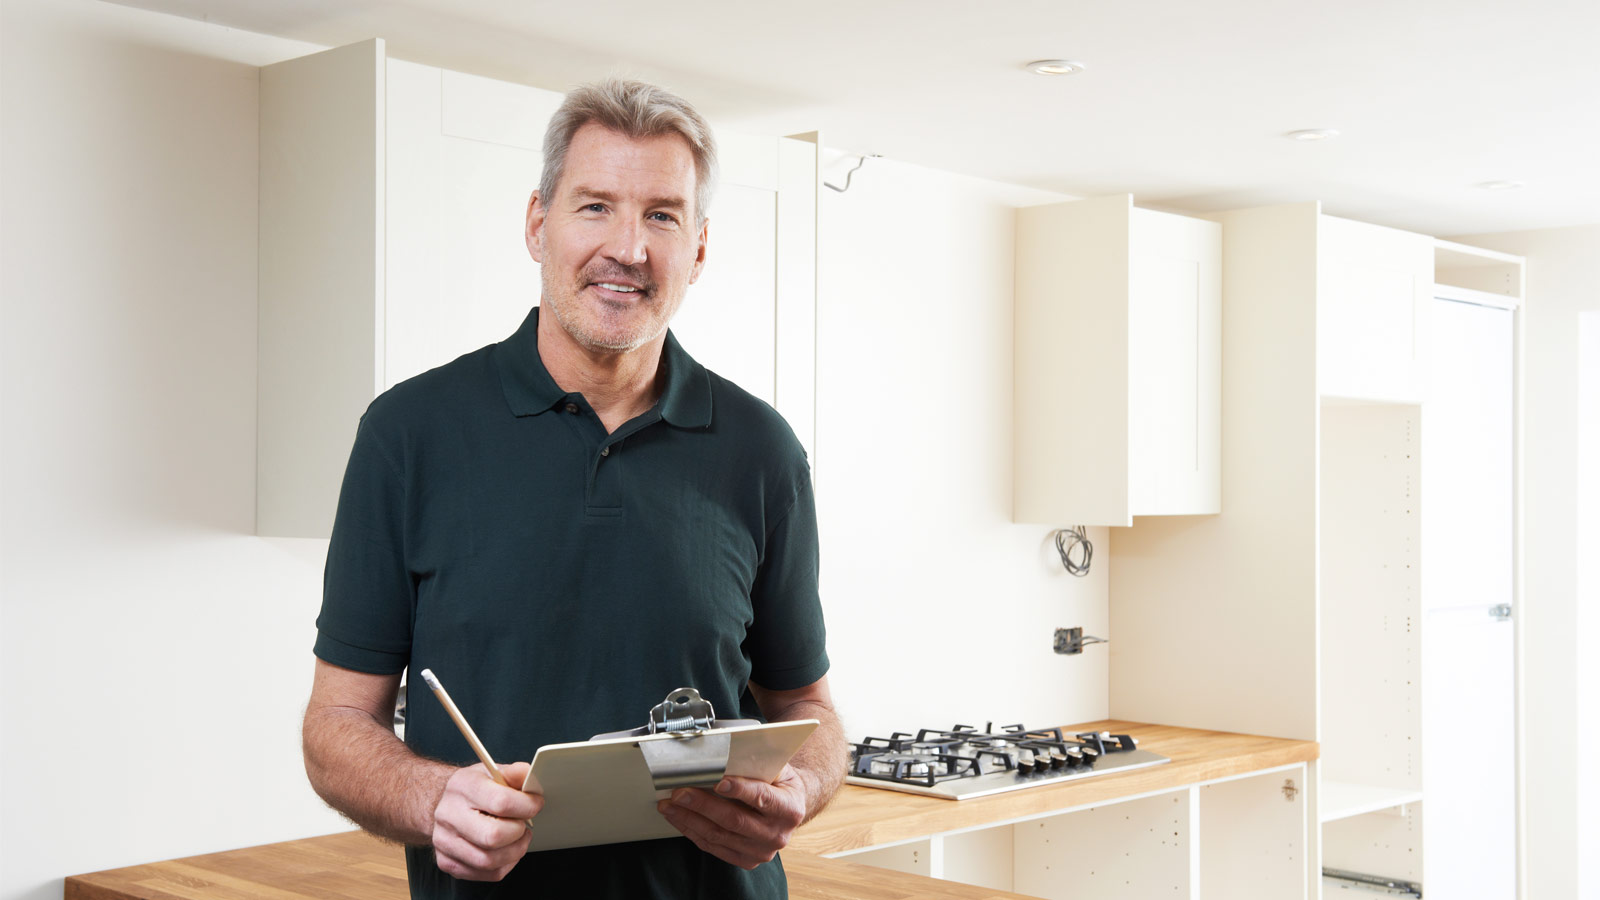 The kitchen fitter’s installation manager for Sigma 3 Kitchens Swansea